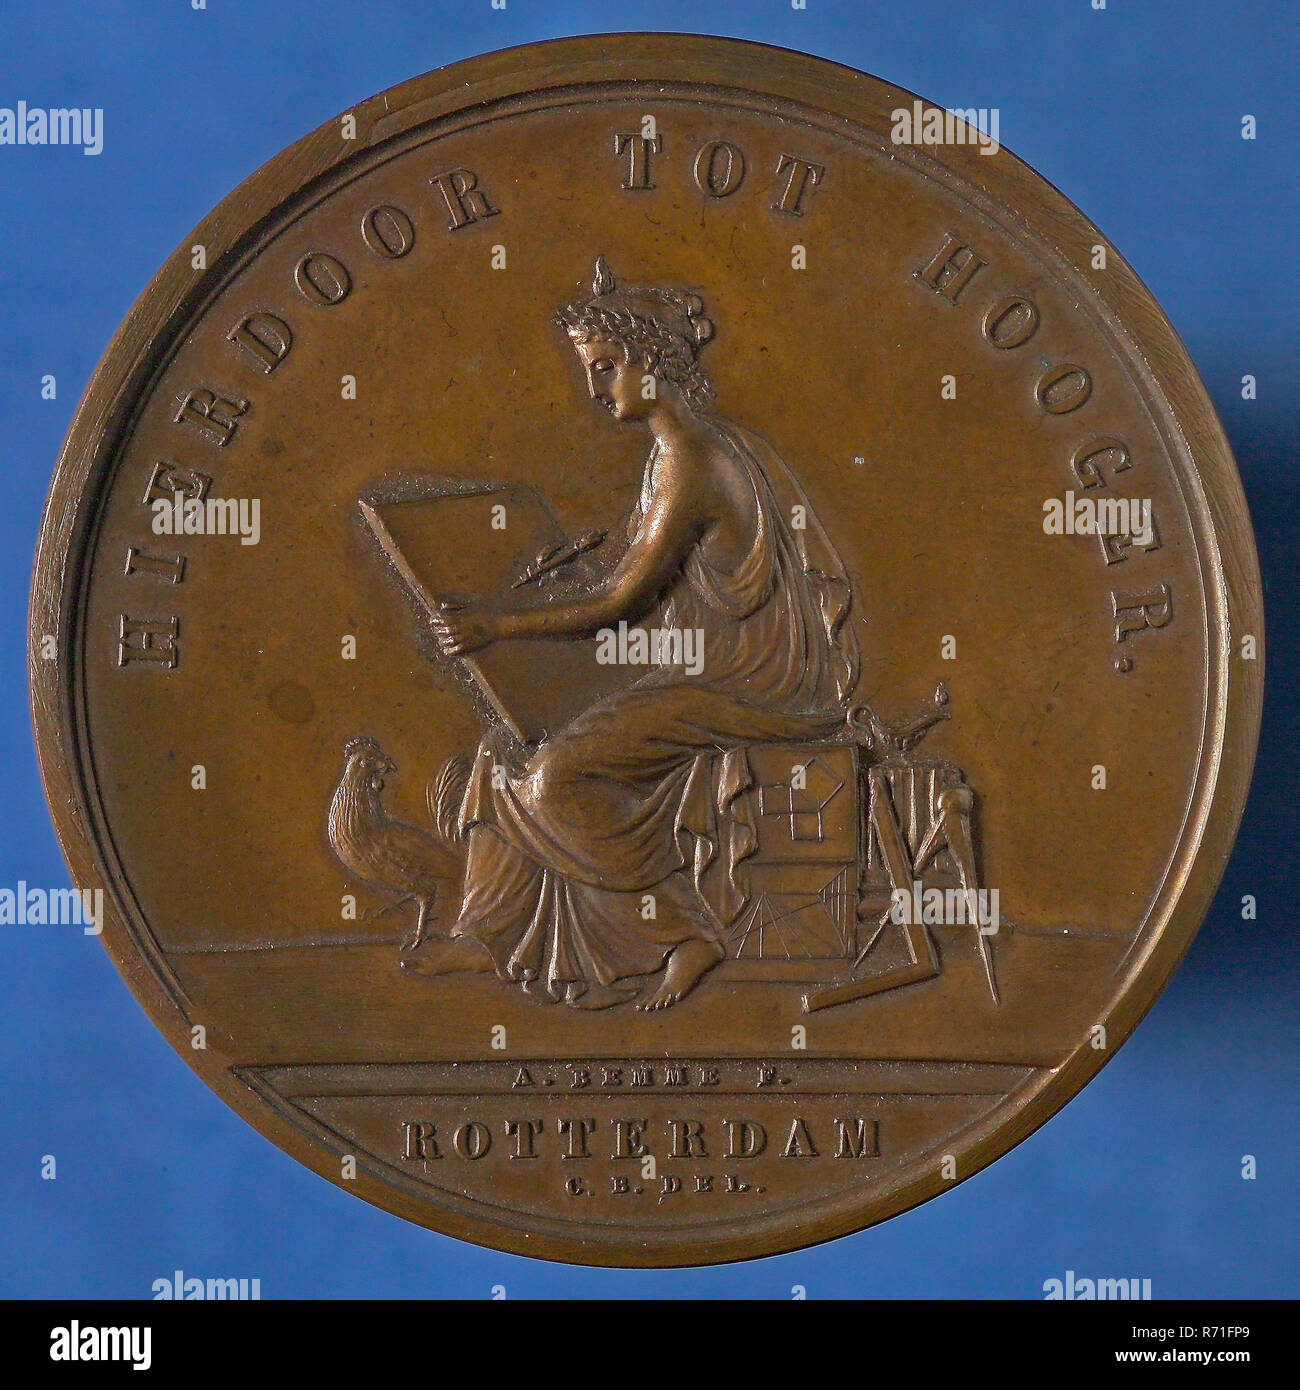 stamp cutter: A. Bemme, Price medal of the Teekengenootschap HIERDOOR TOT HOOGER, awarded to .M. Kool van Kasteel, price medal medal bronze bronze figure 5,1, Image Muse of drawing, HEREY TO HOOGER (legend) . BEMME F. ROTTERDAM C.. DEL (in cut-off) drawing society This means Hooger Rotterdam Stock Photo